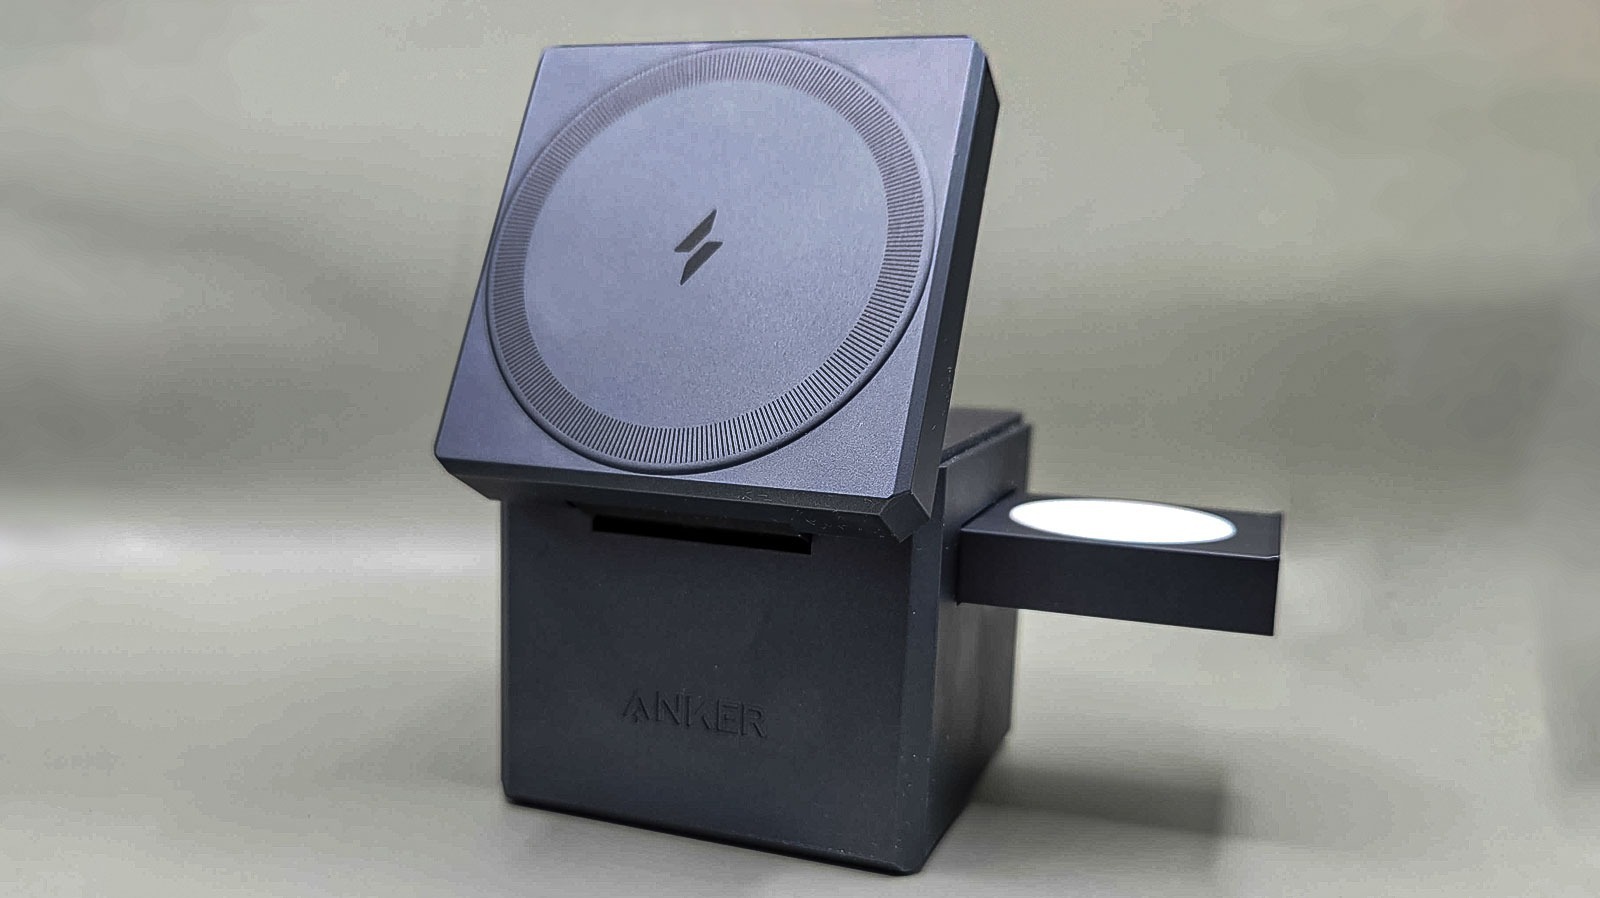 Anker's Innovative 3-in-1 MagSafe Cube Charger Is 10% Off With This Code -  CNET